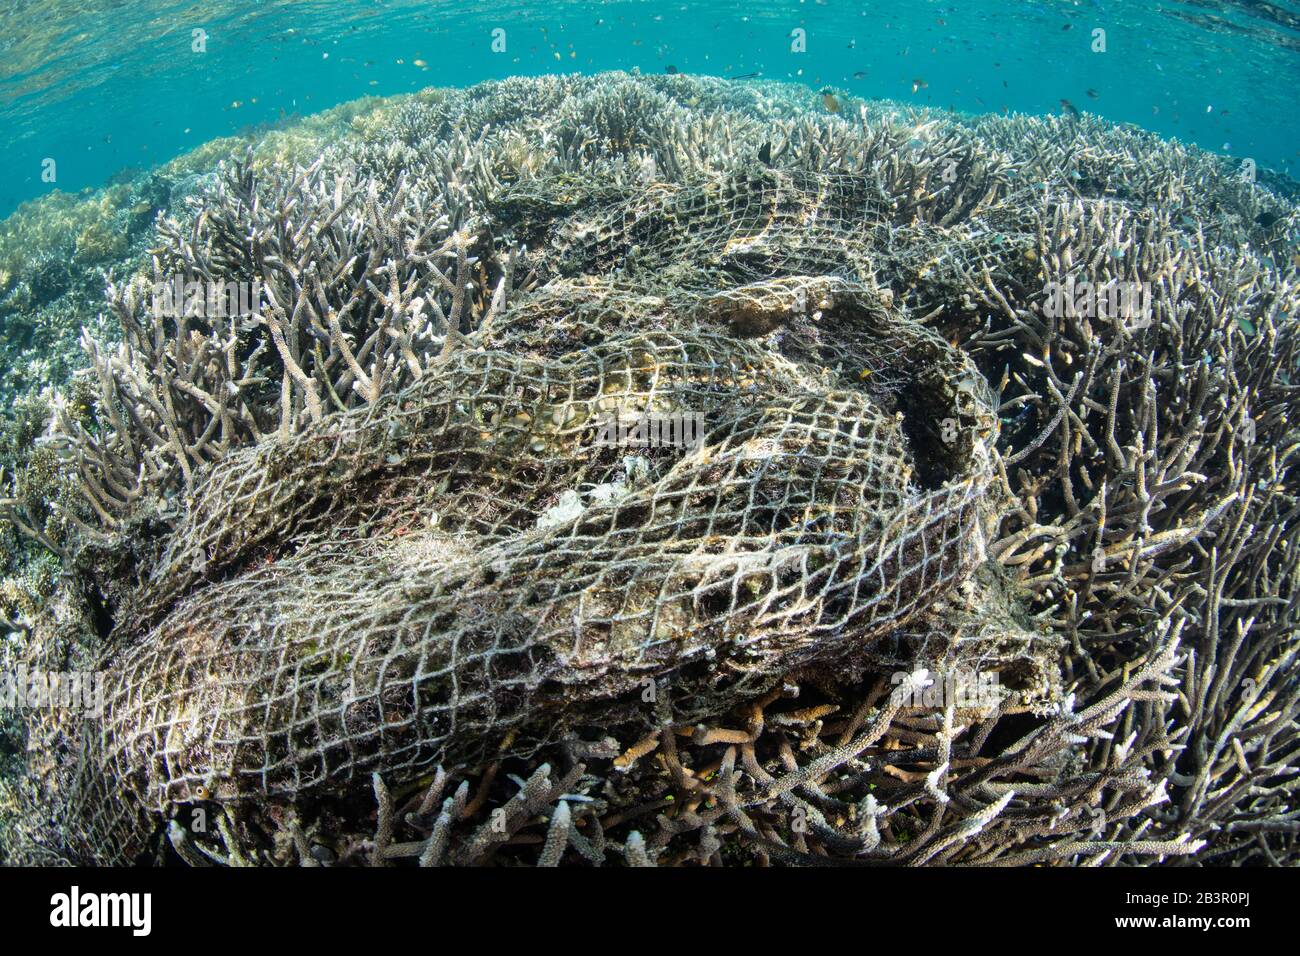 A huge discarded fishing net has become entangled in a shallow